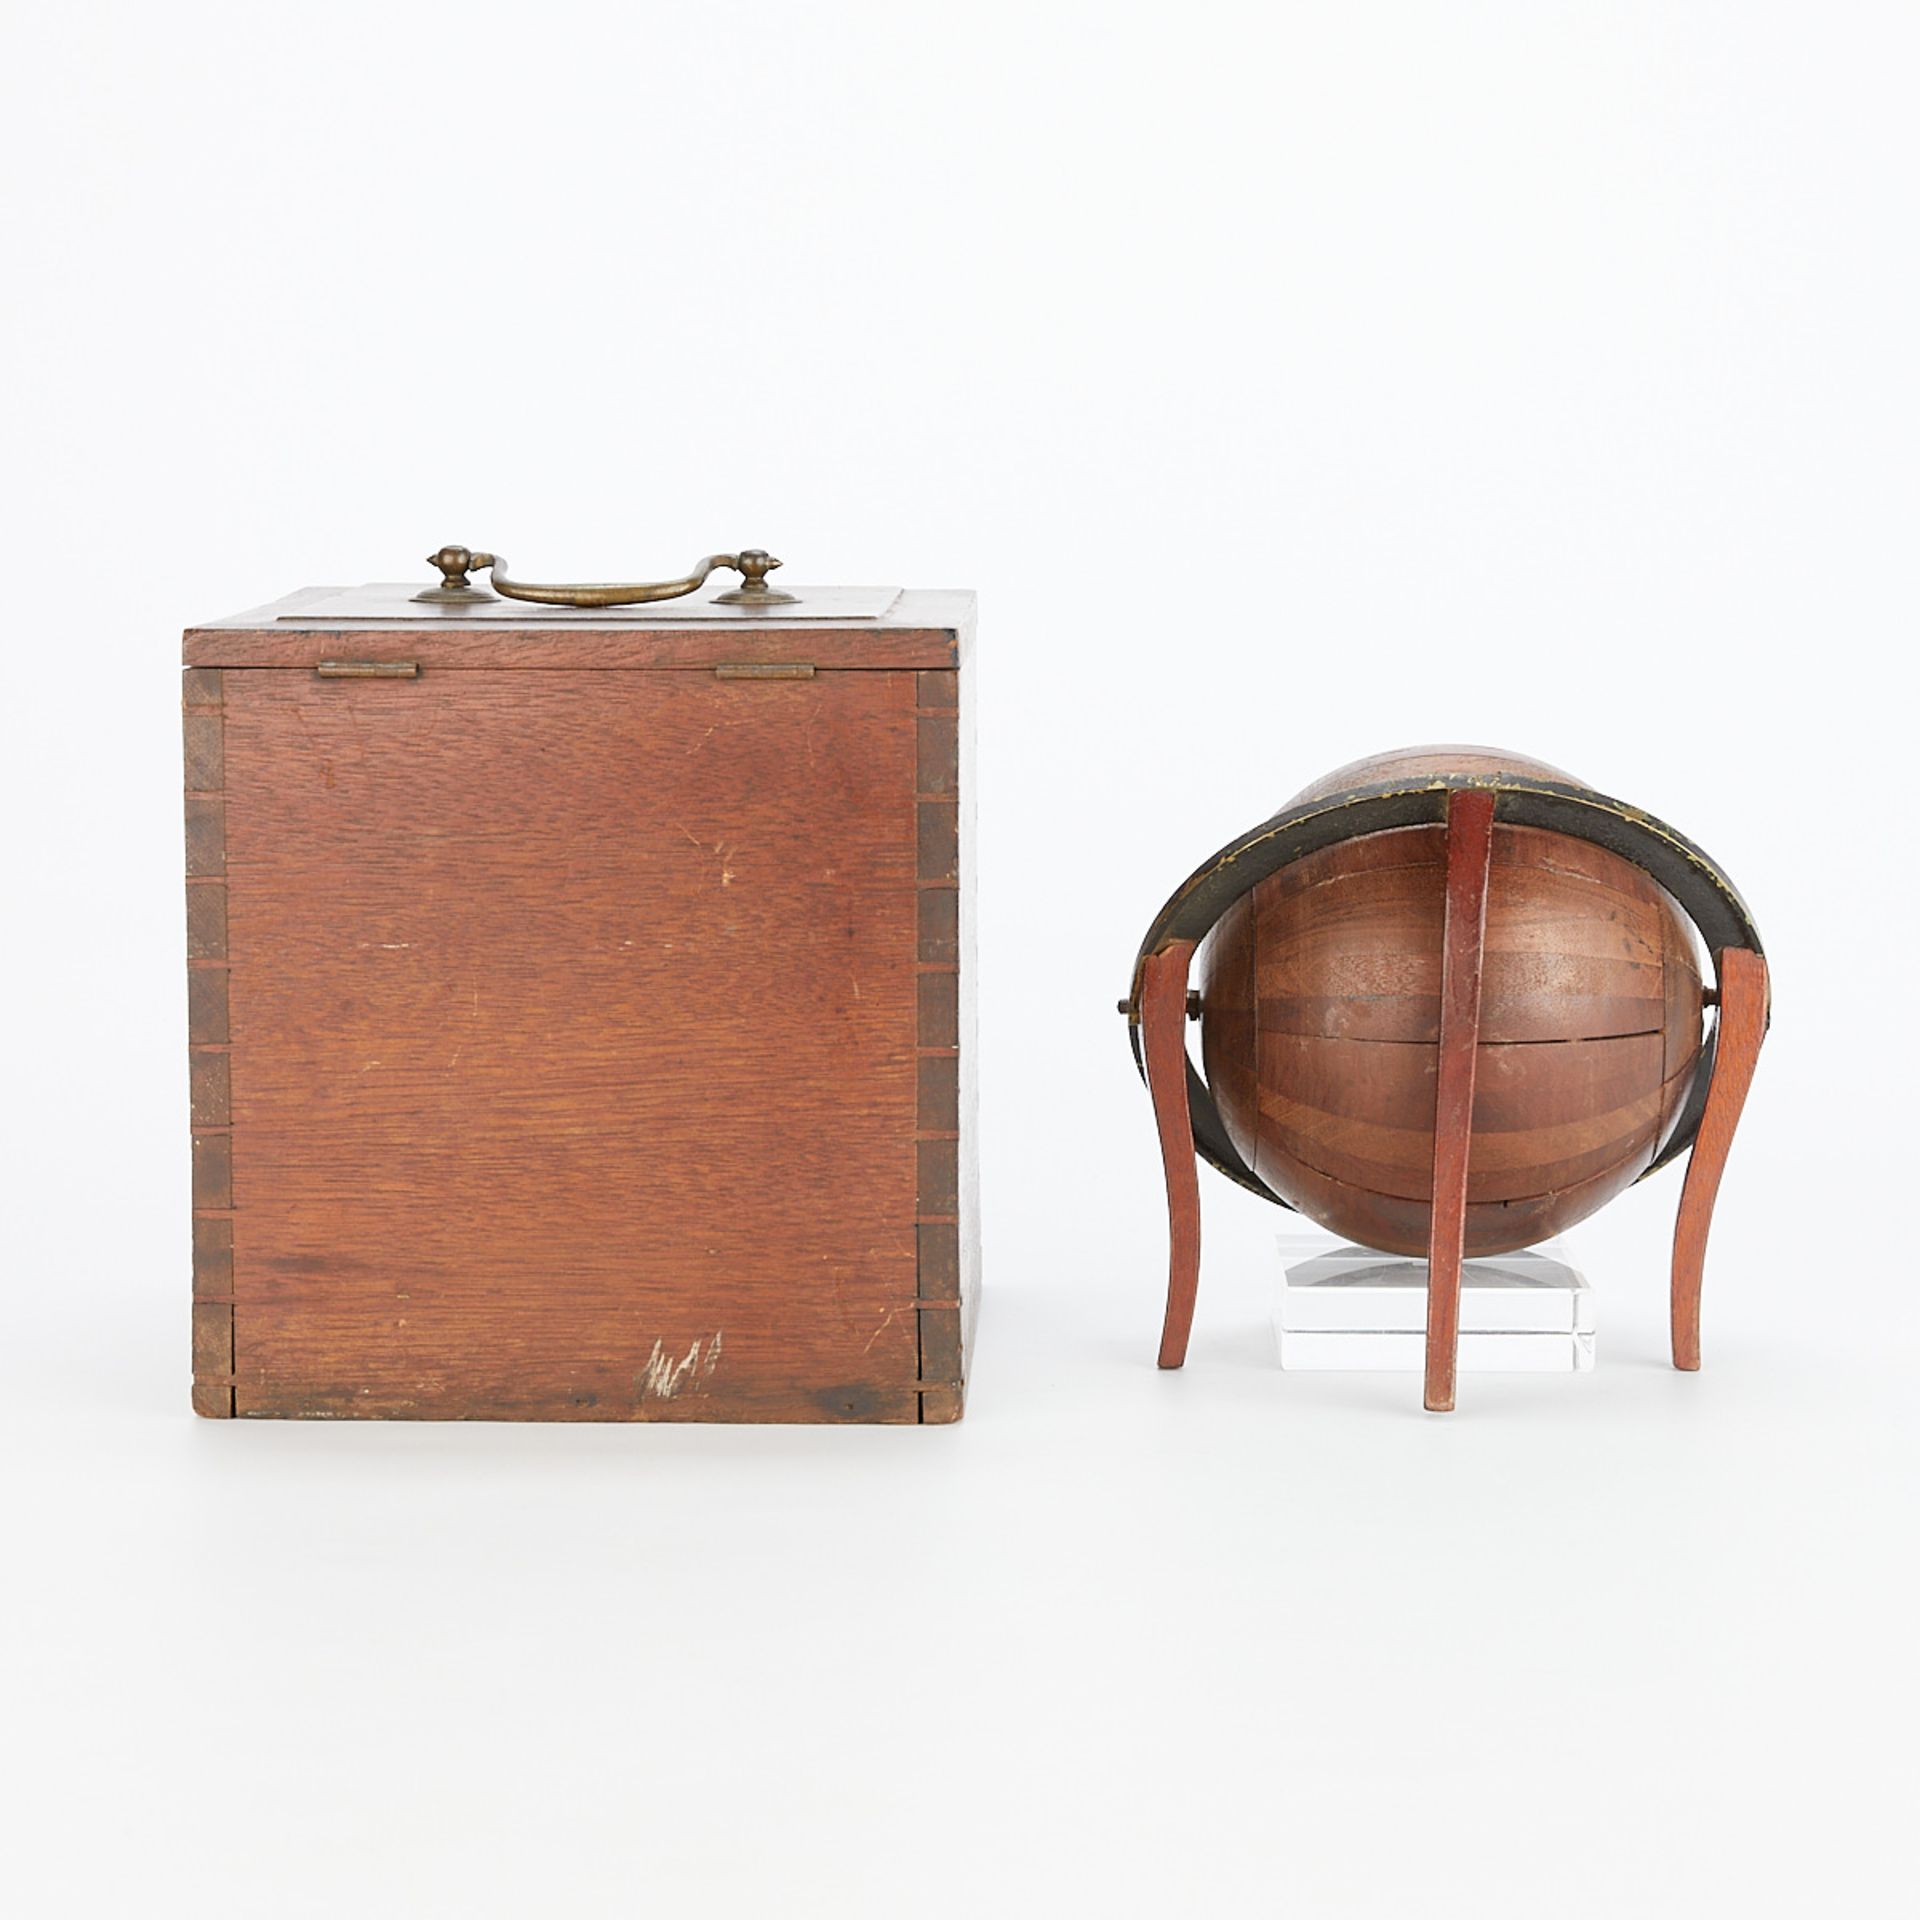 Vintage Wooden Sphere or Globe with Case - Image 5 of 15